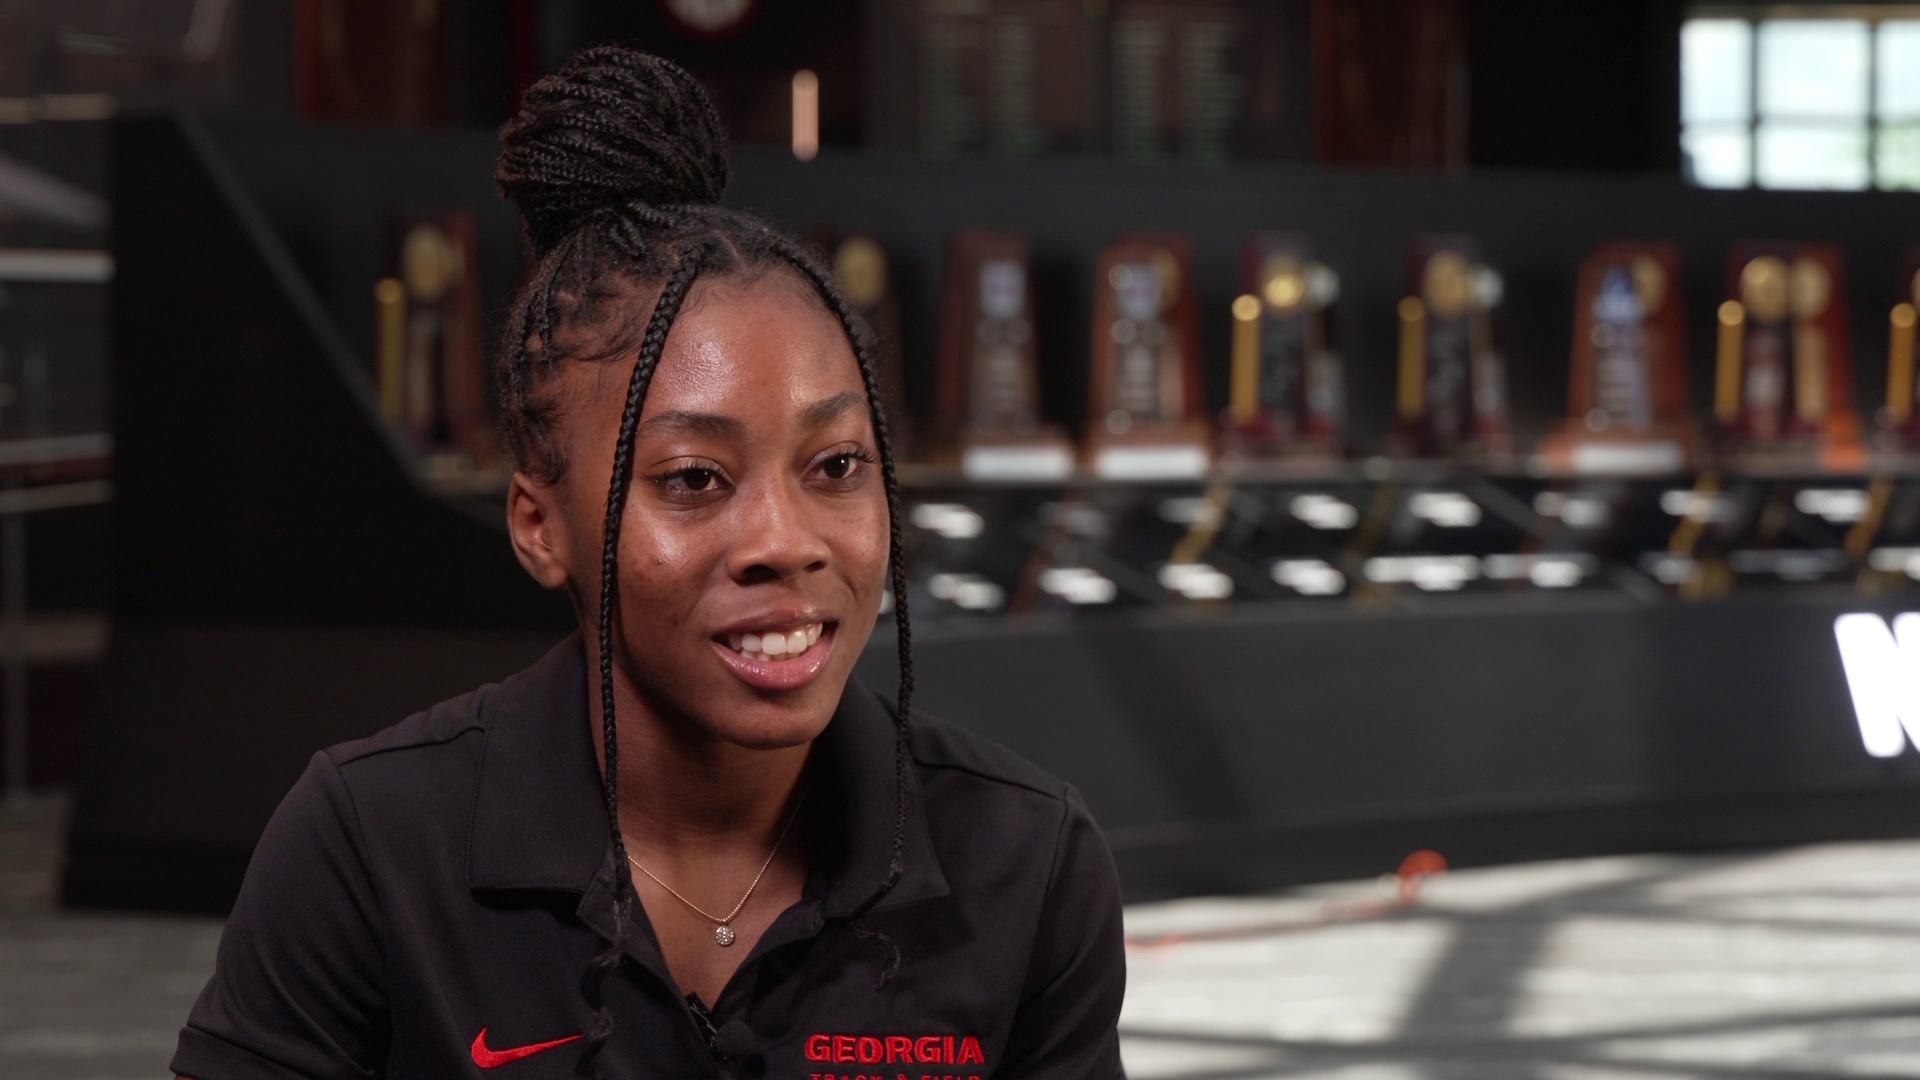 UGA sophomore Aaliyah Butler is heading to Paris to compete in the 400m sprint. She shares about her history with the race and what Paris means to her.